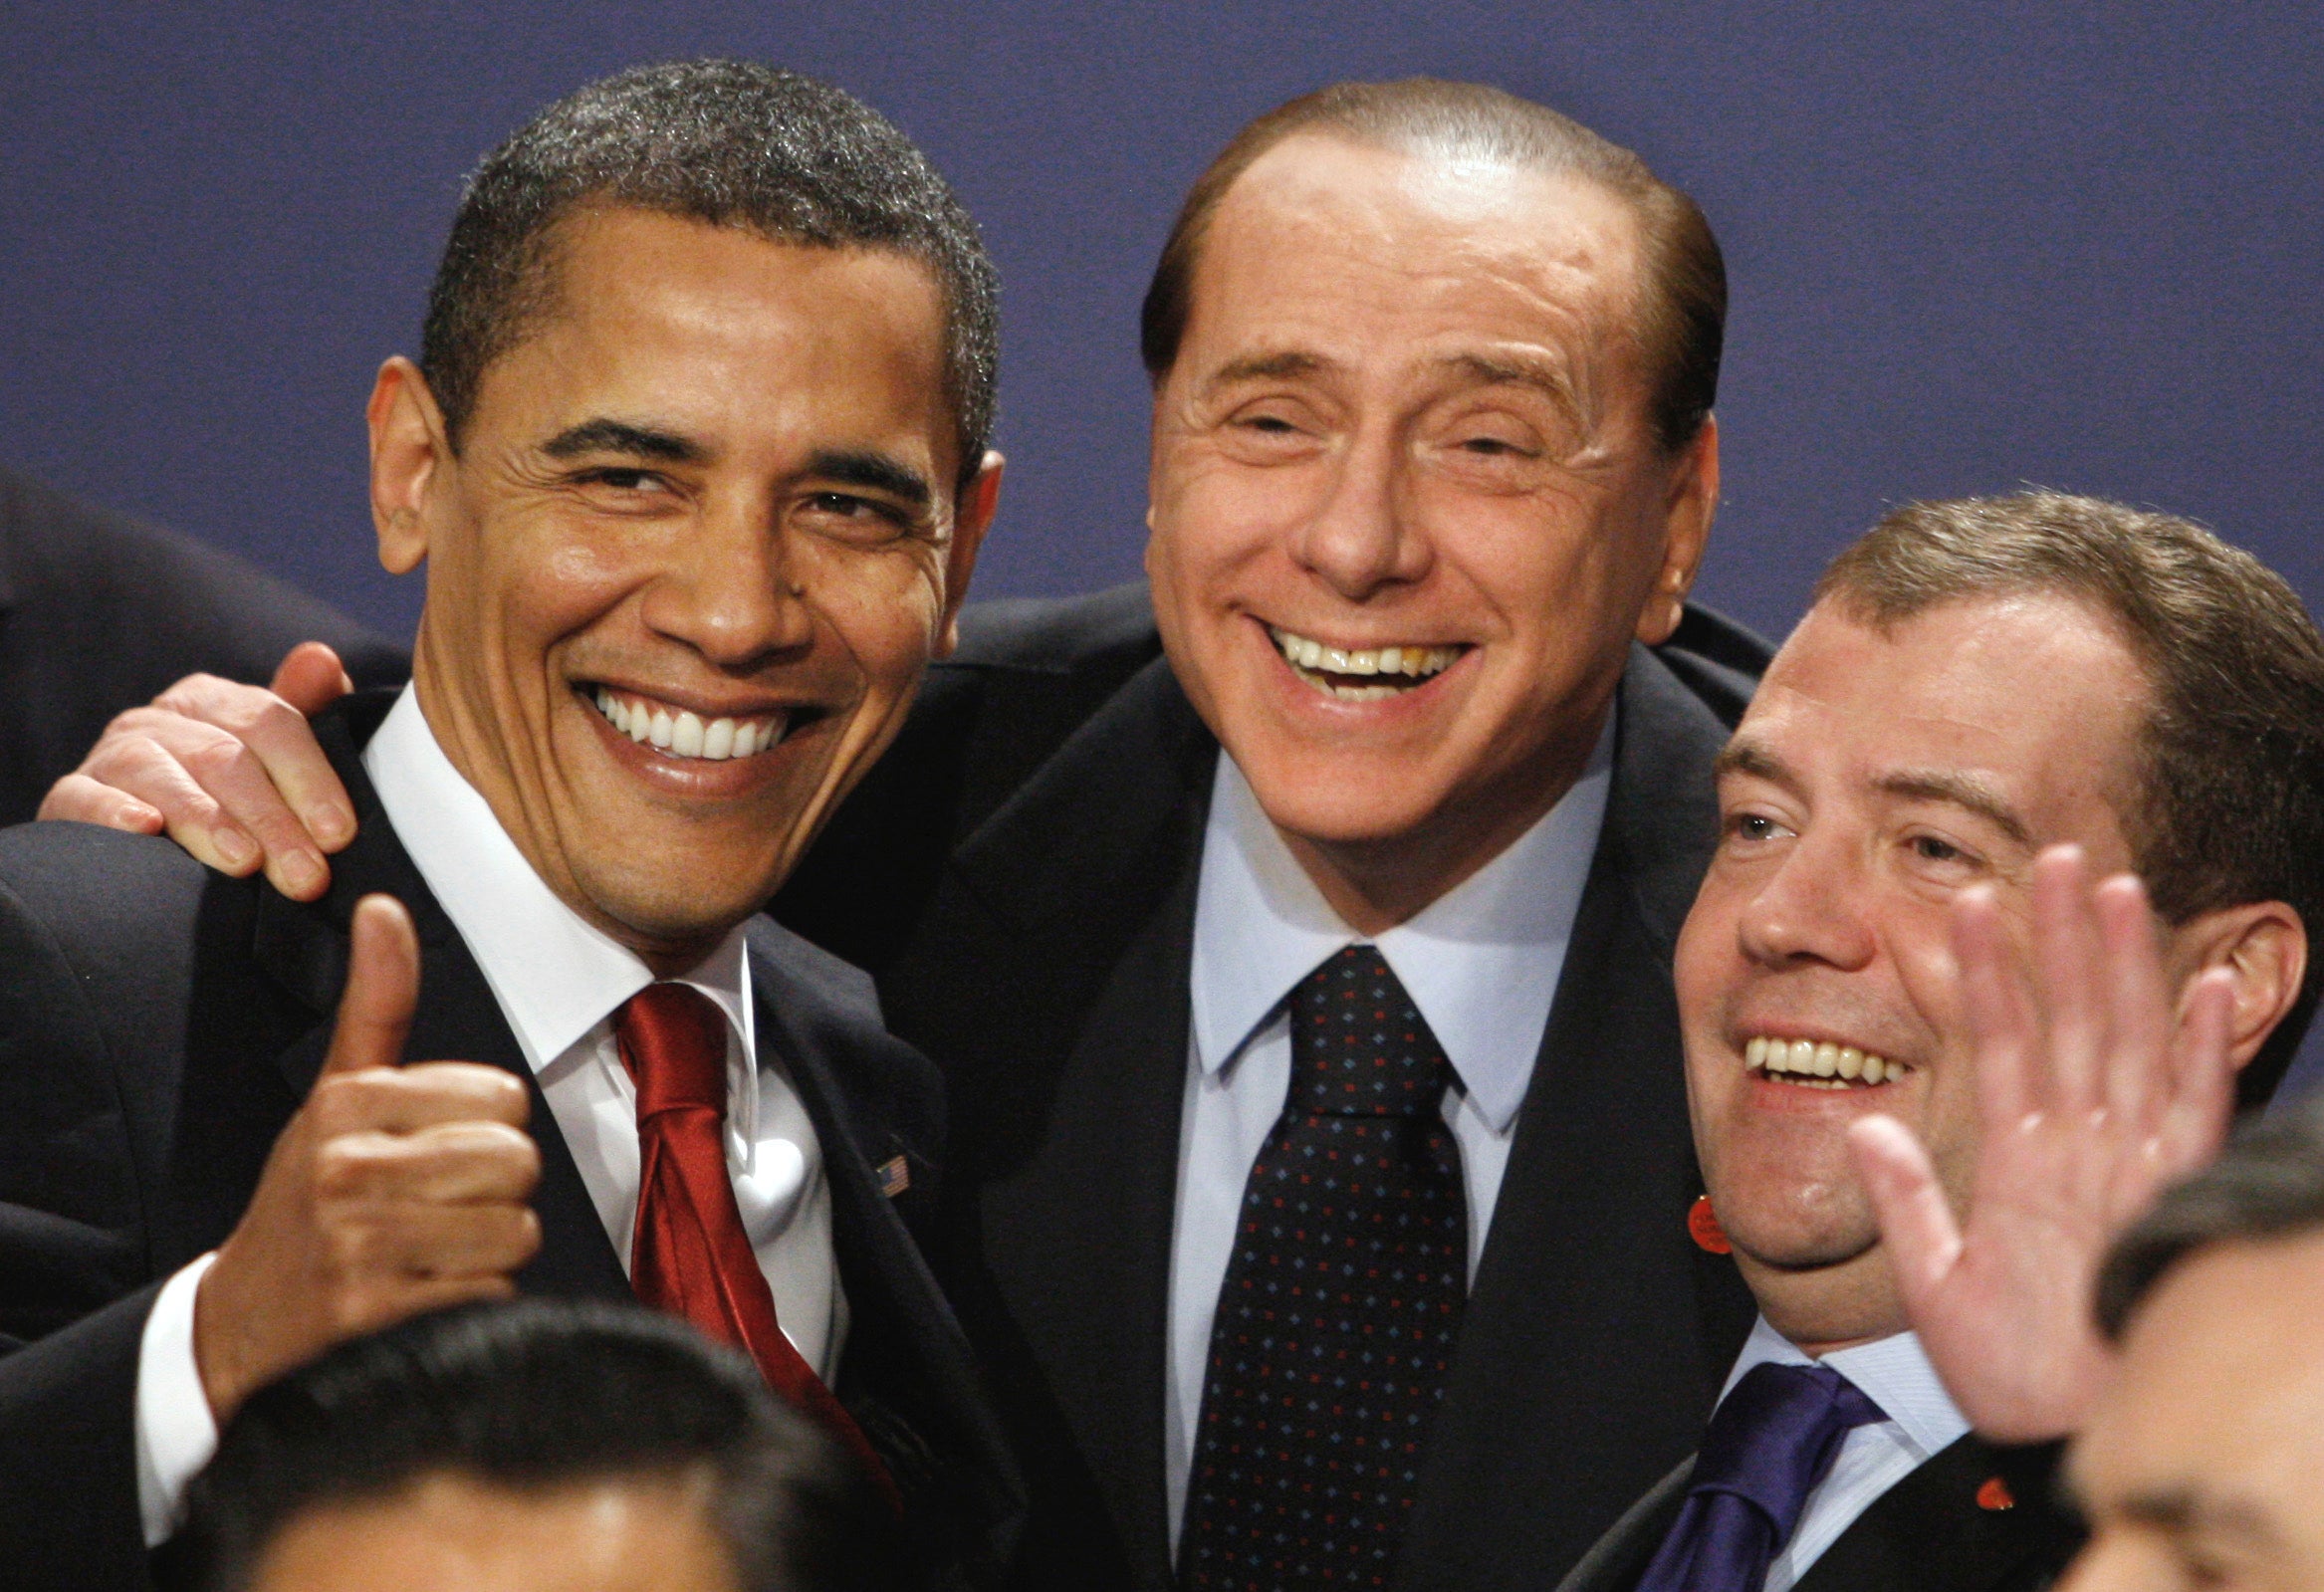 Barack Obama, Berlusconi and Russian president Dmitry Medvedev smile in a group photo at the G20 summit in London